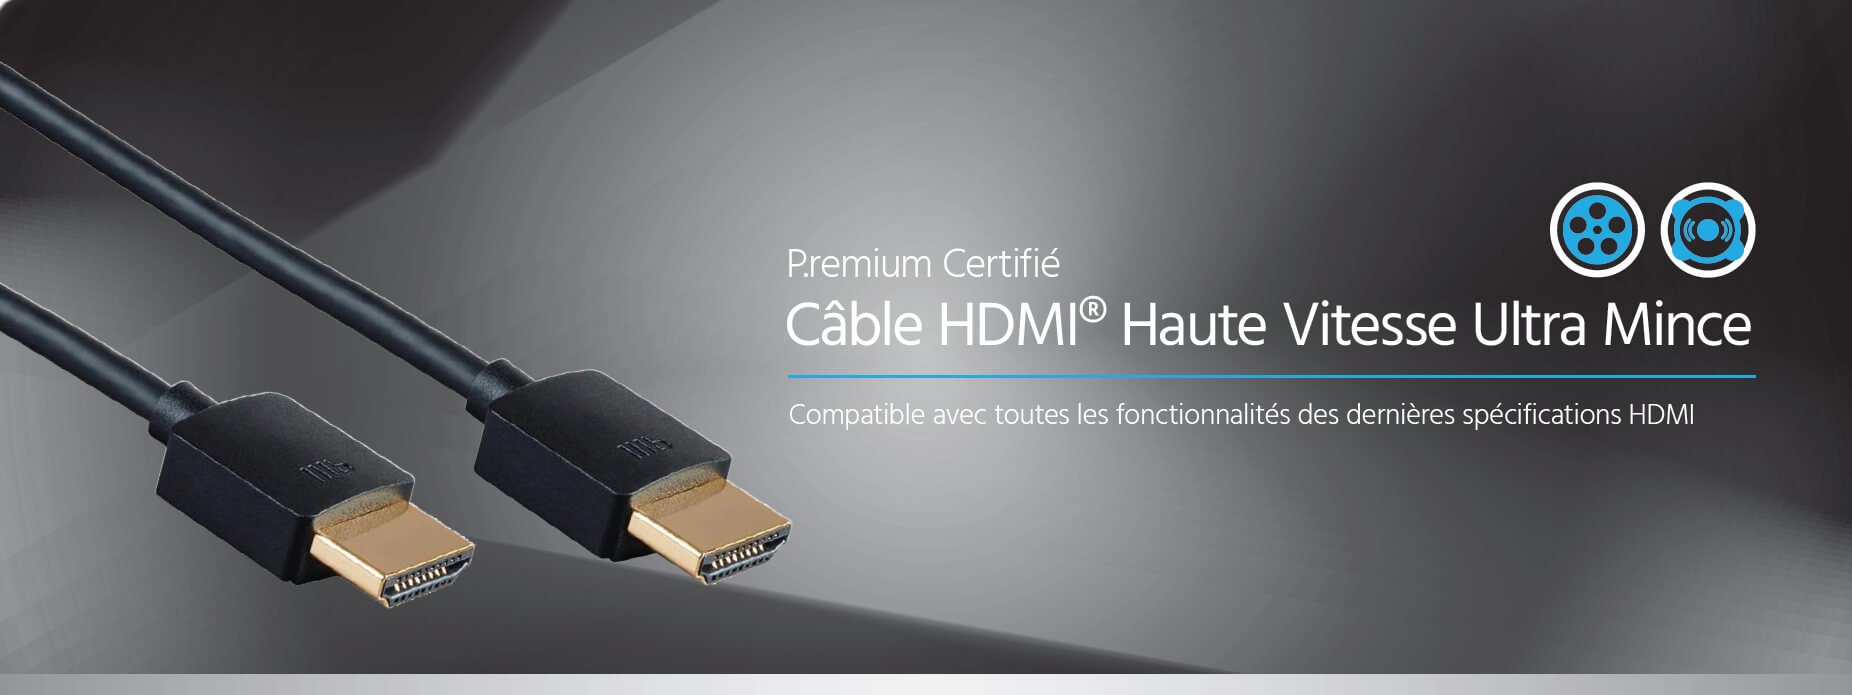 Certified Premium High Speed HDMI Cable